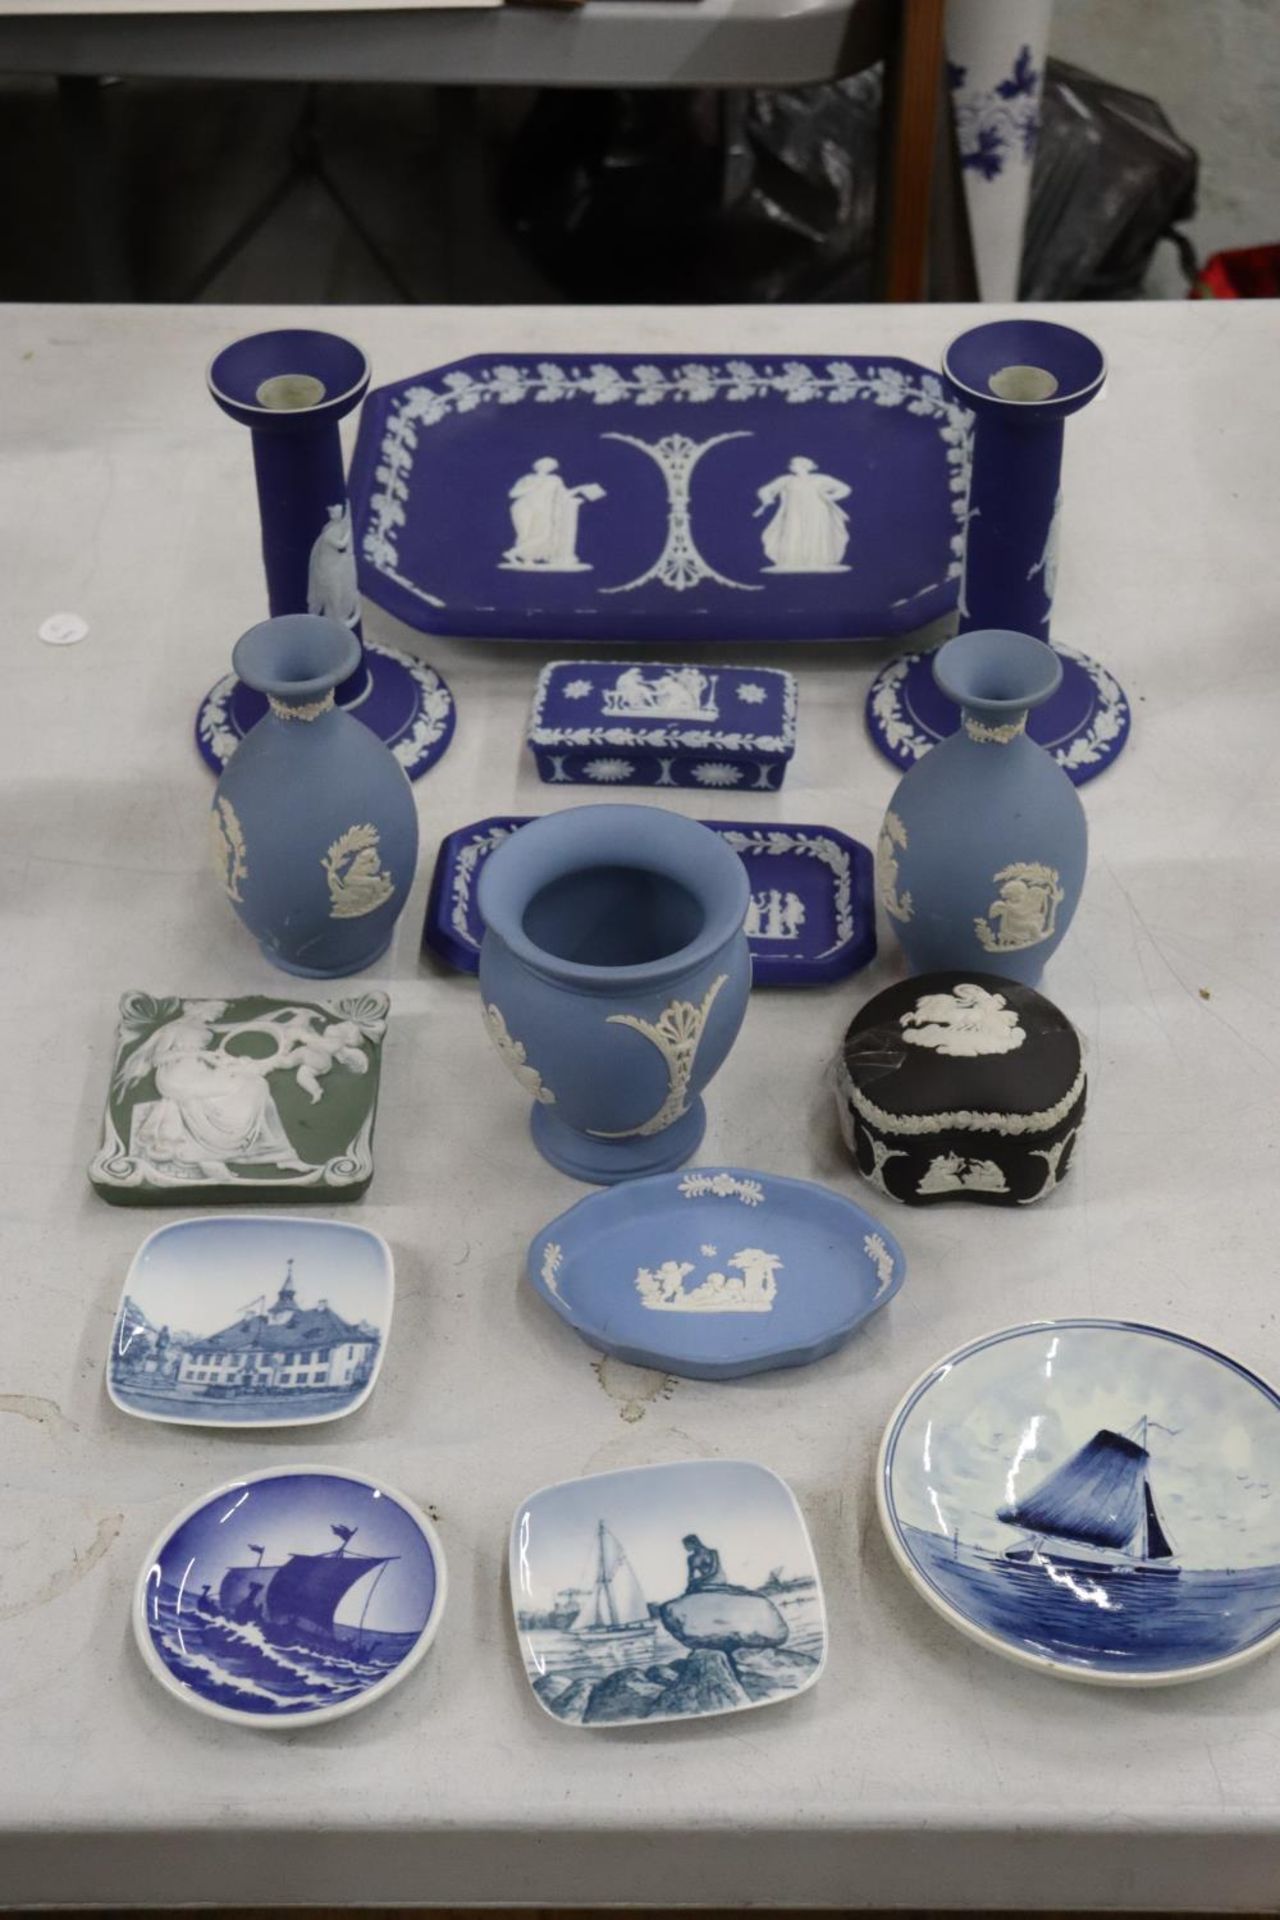 A MIXED LOT OF WEDGEWOOD TO INCLUDE CANDLESTICKS, TRINKET BOXES, VASES ETC PLUS A FURTHER